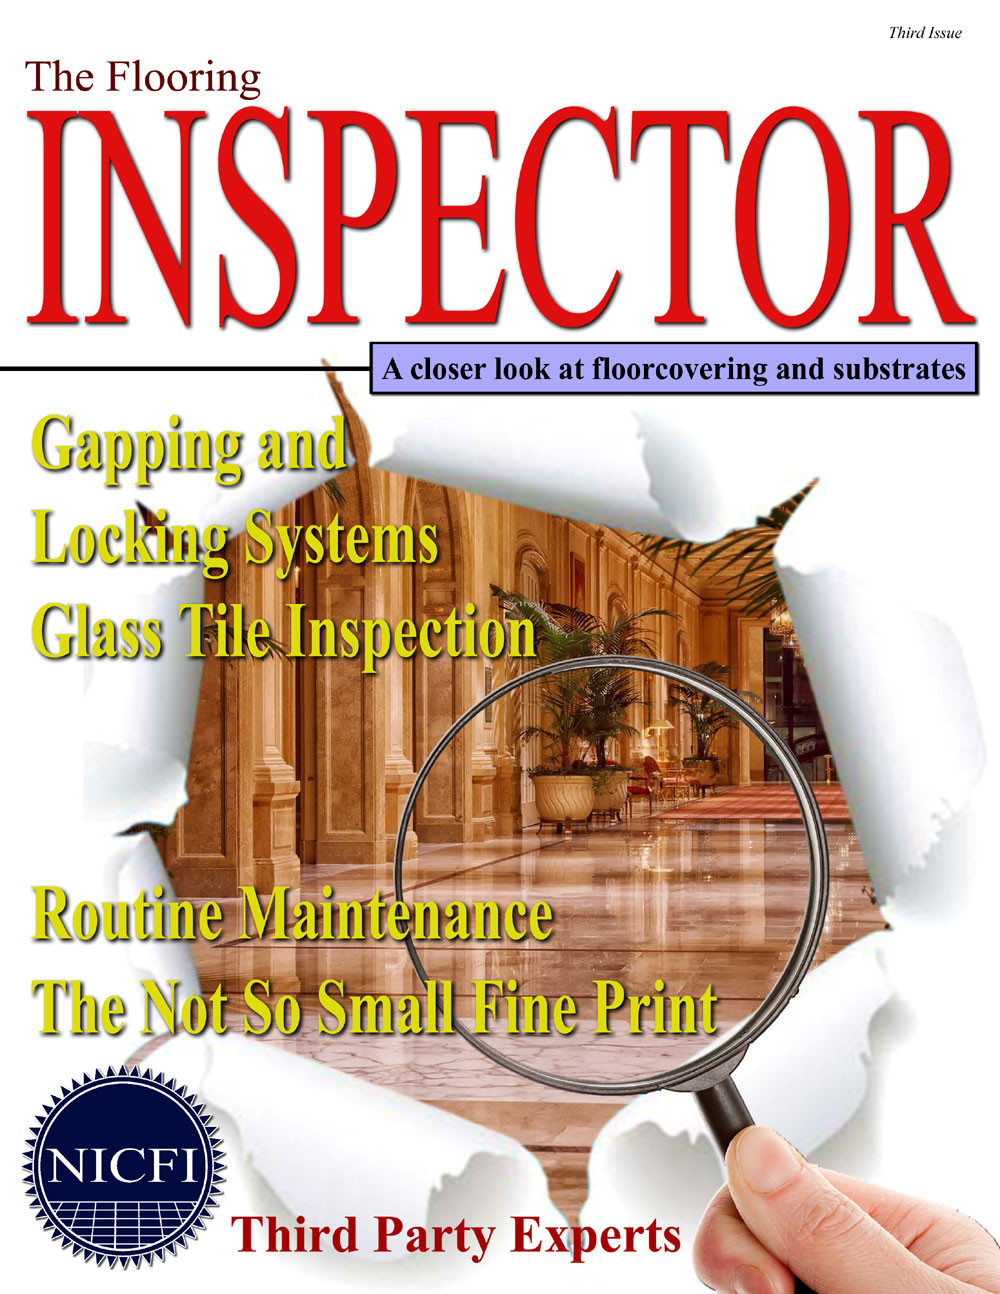 hardwood floor refinishing greensburg pa of nicfi national institute of certified floorcovering inspectors inside please click the link below to be directed to the flooring inspector digital magazine issues